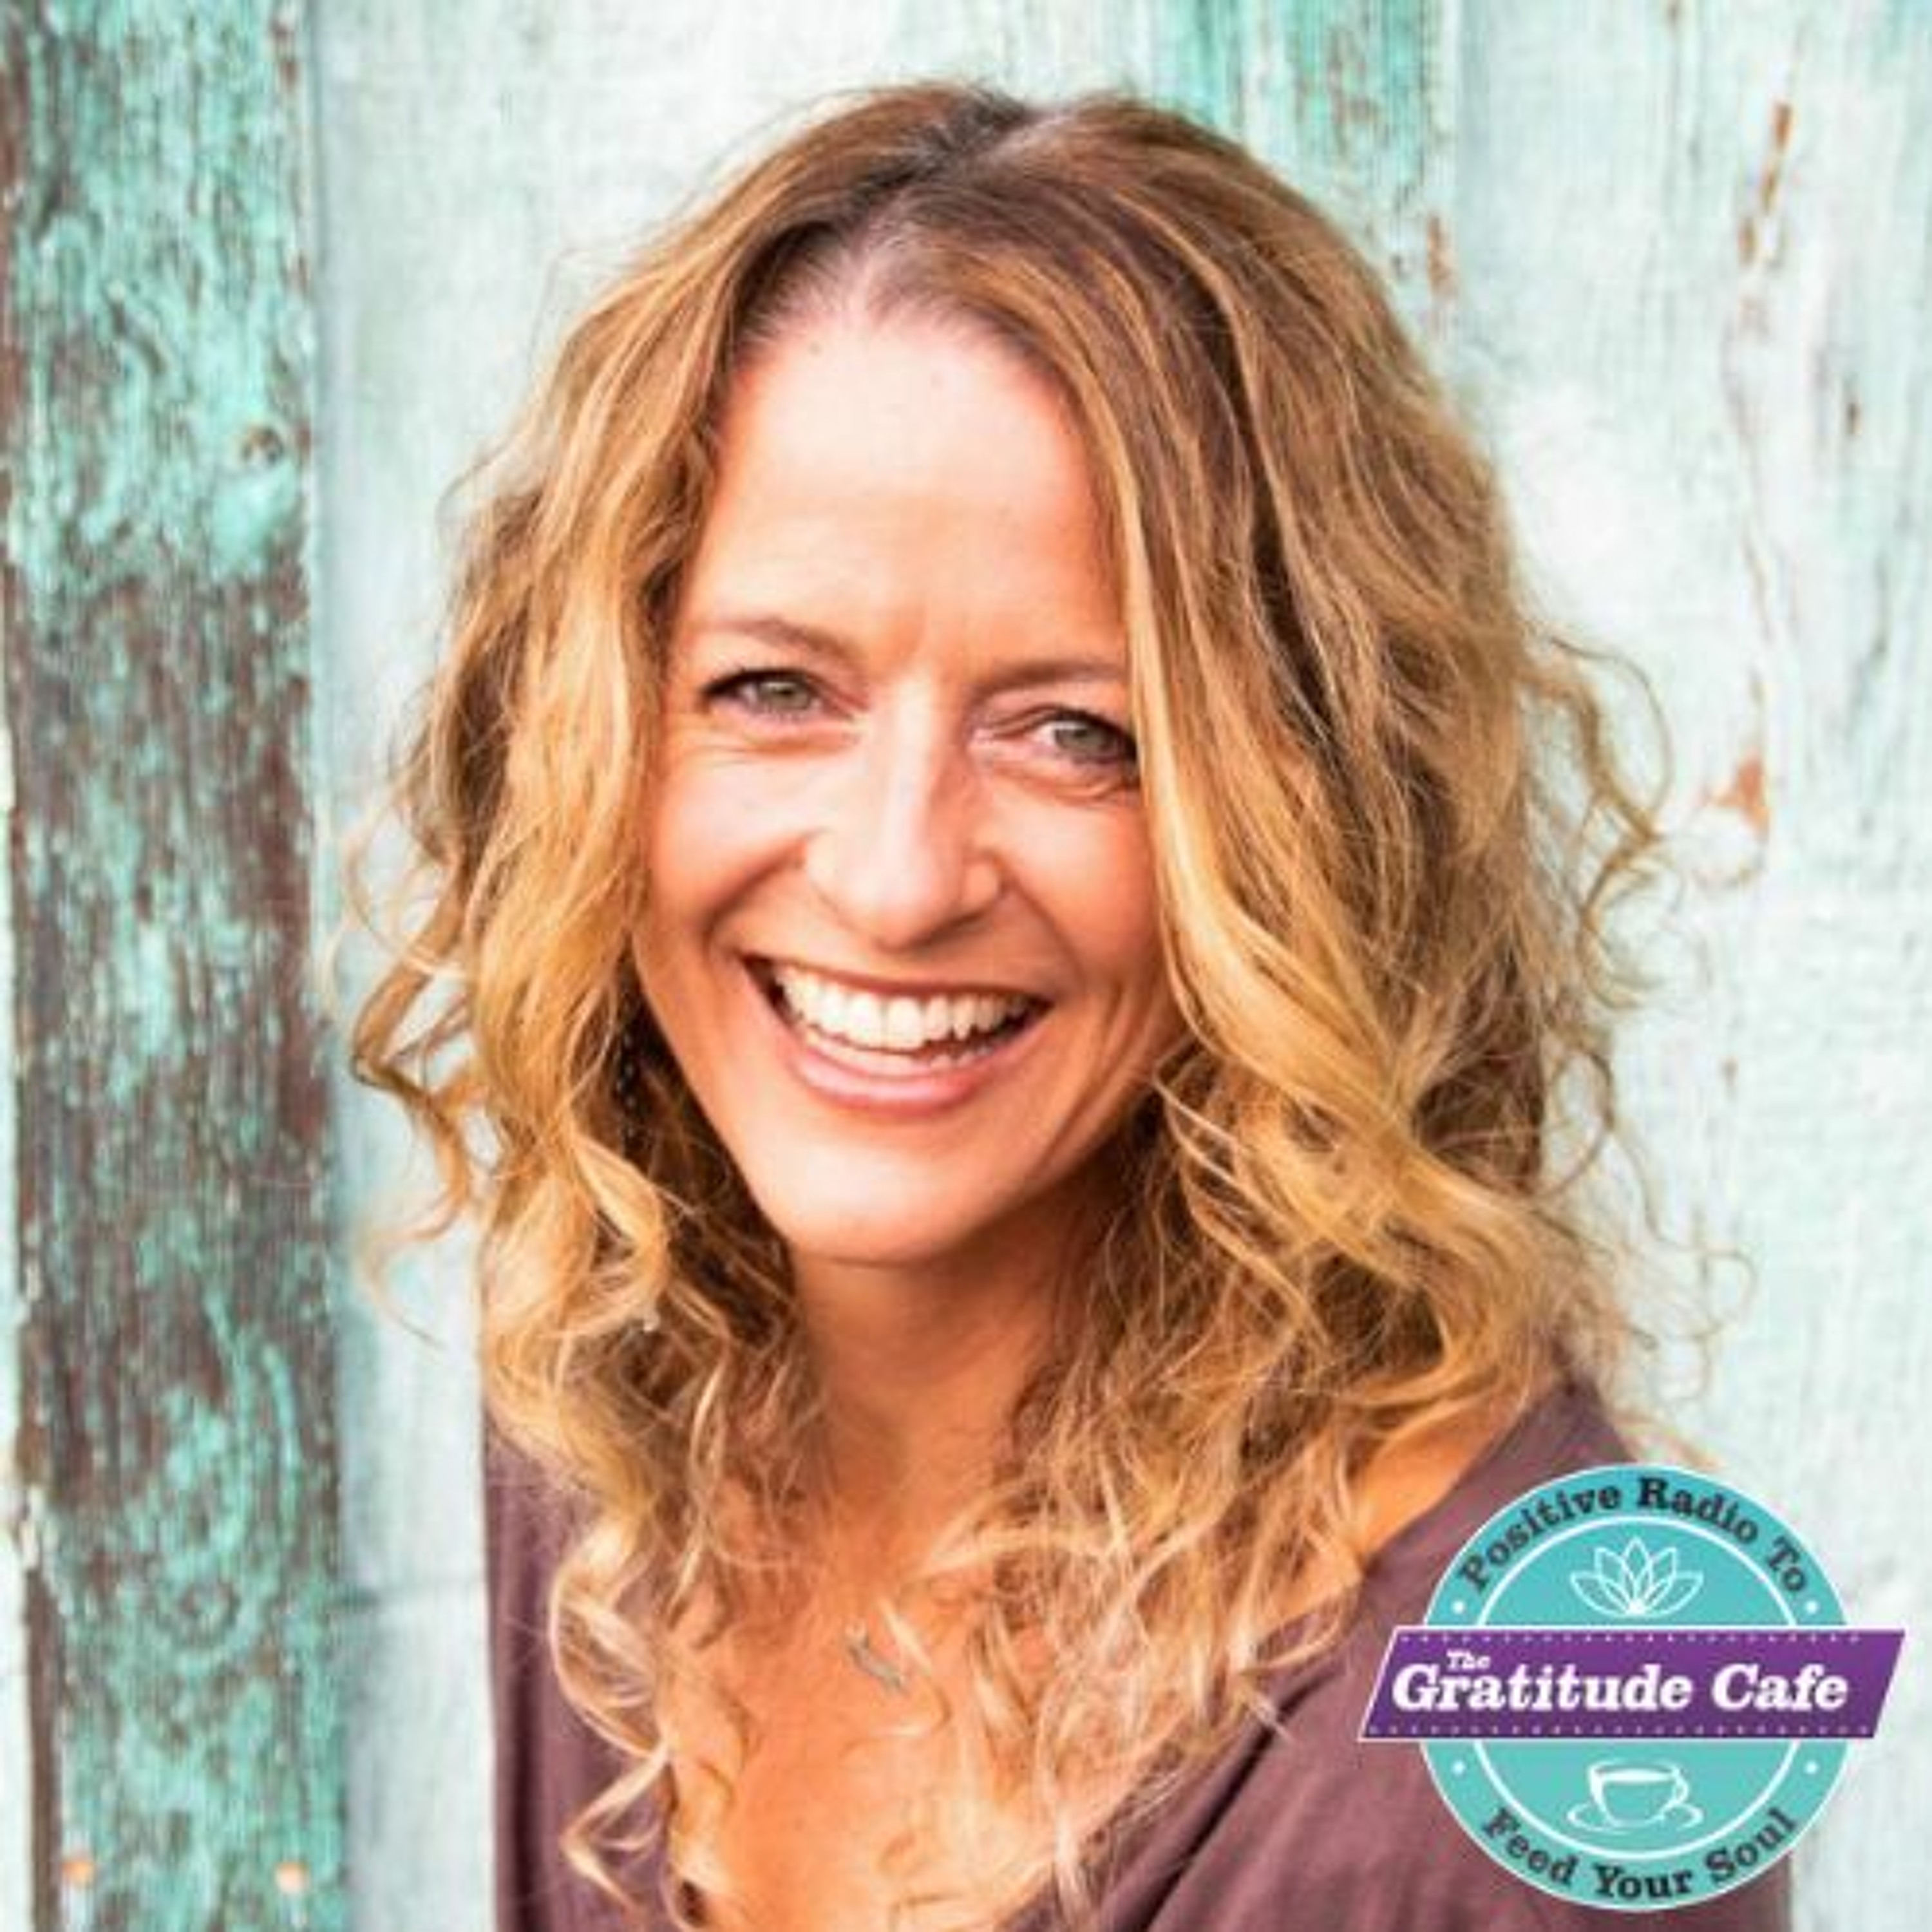 Episode 210: How Gratitude is part of caring for yourself as a vibrational being with Whitney Freya